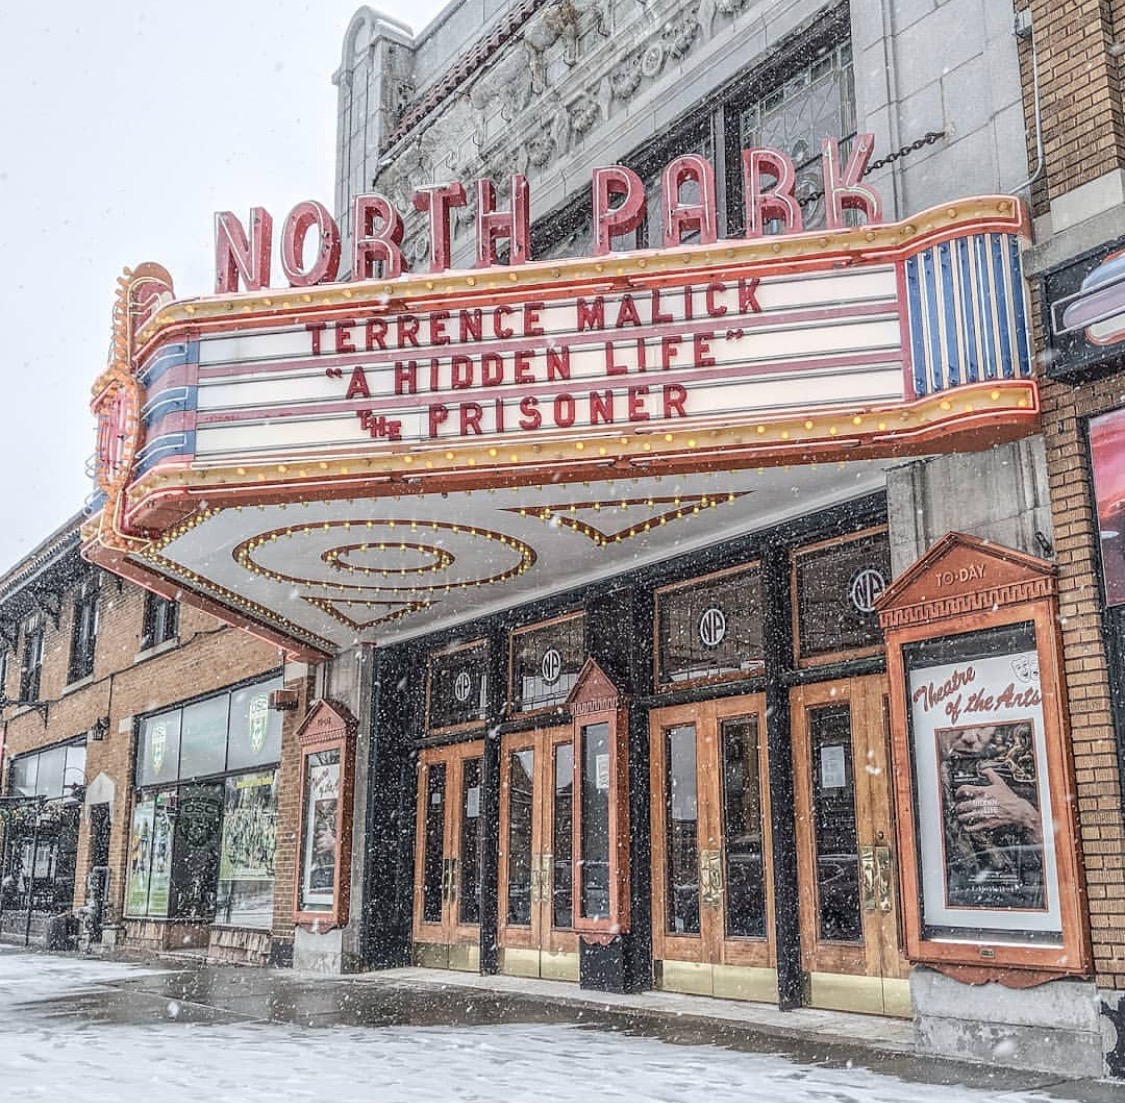 A Visit to the North Park Theatre